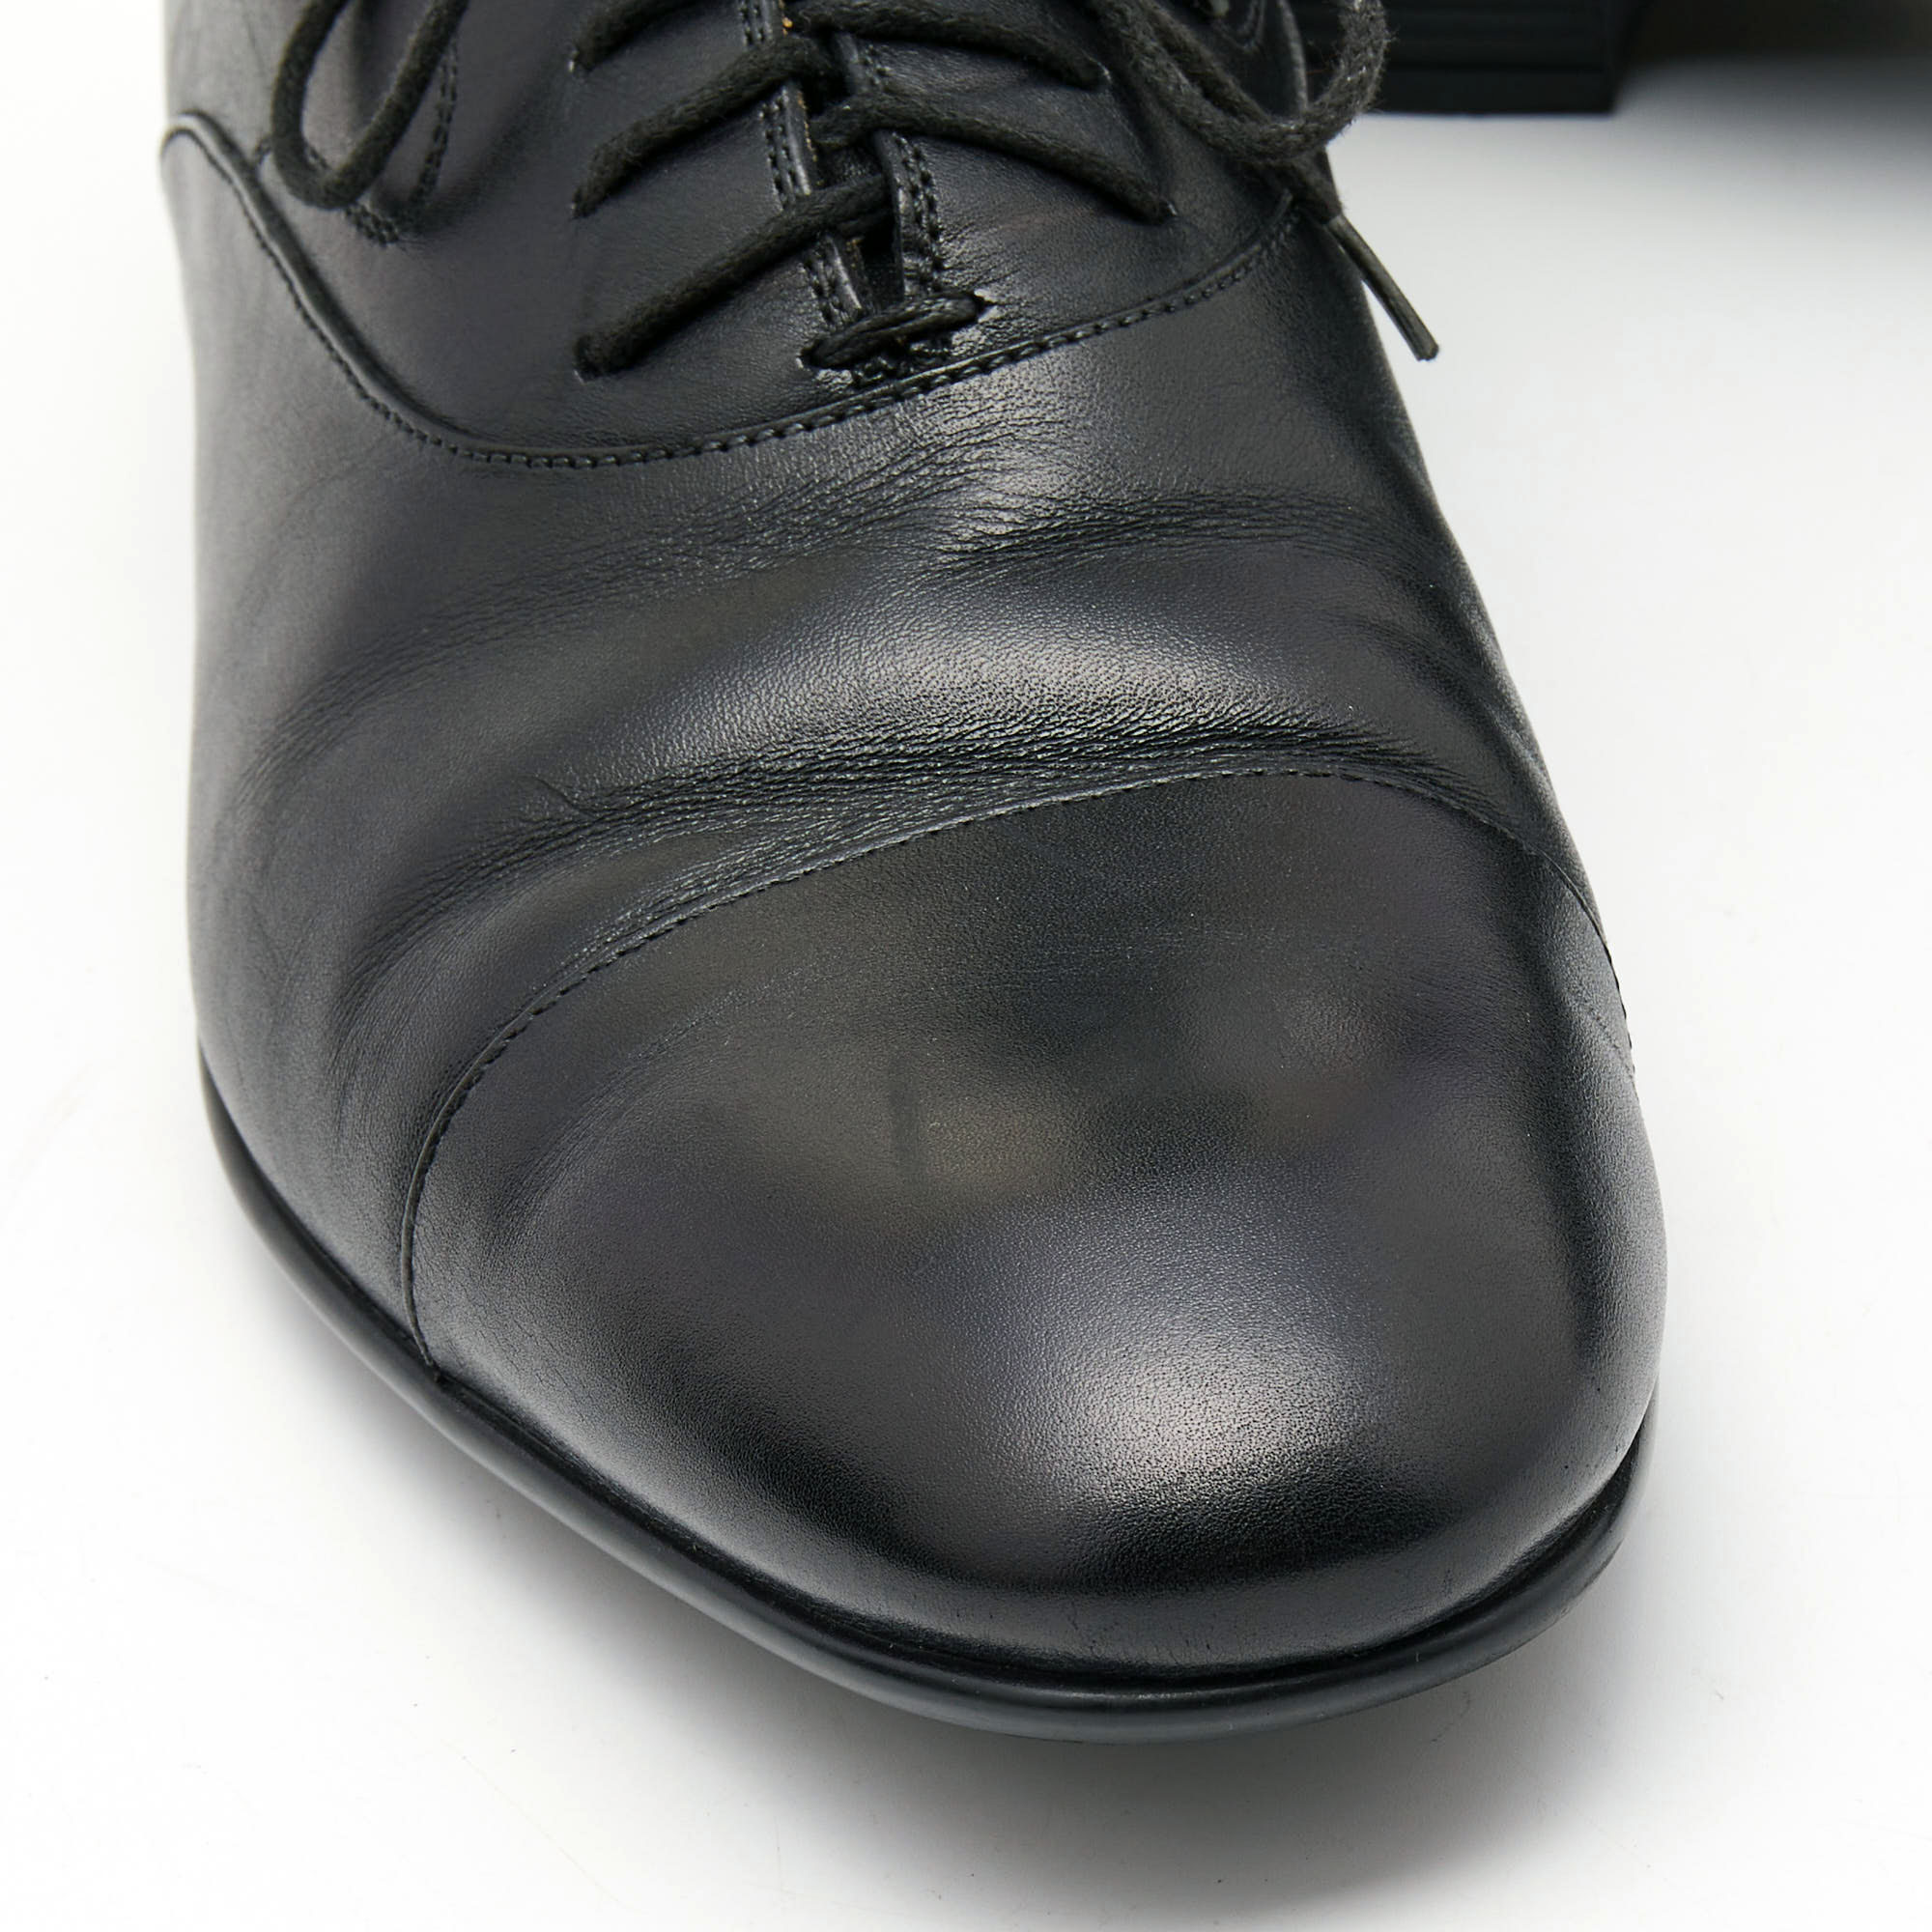 Gucci Dark Black Leather Lace Up Oxfords Size 42.5